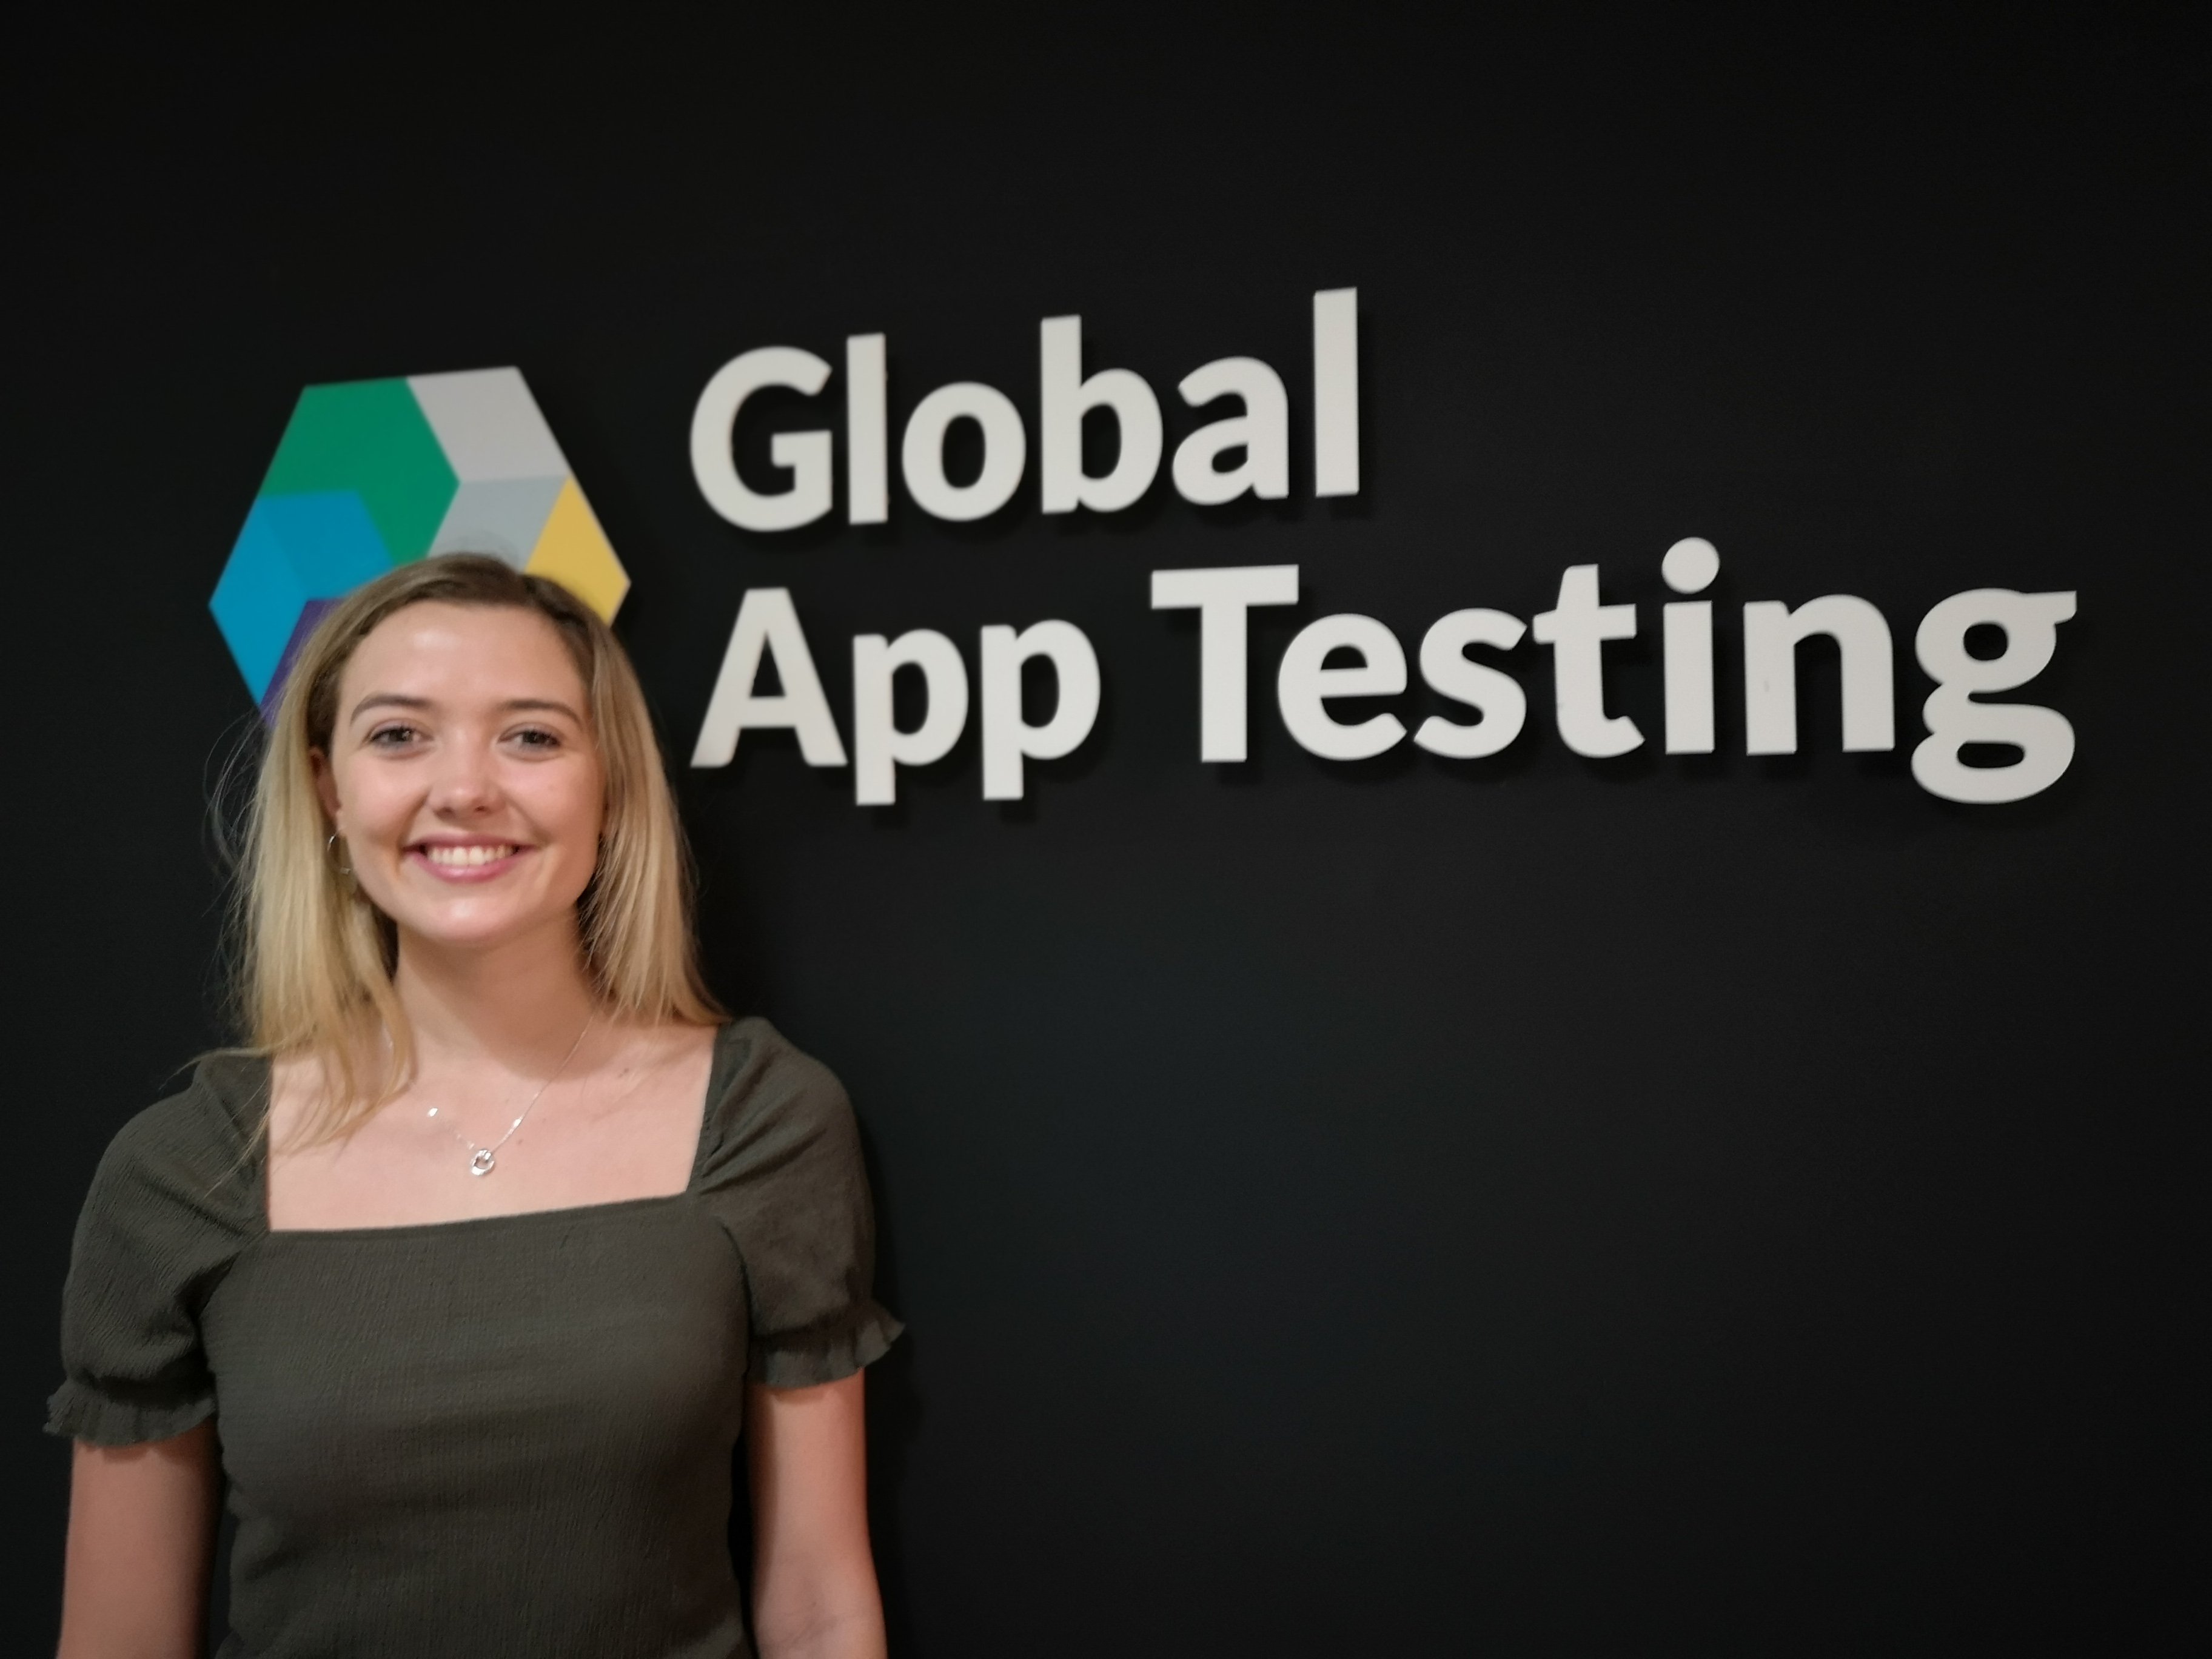 Achieving Diversity in Software Testing post written by Amelia Whyman